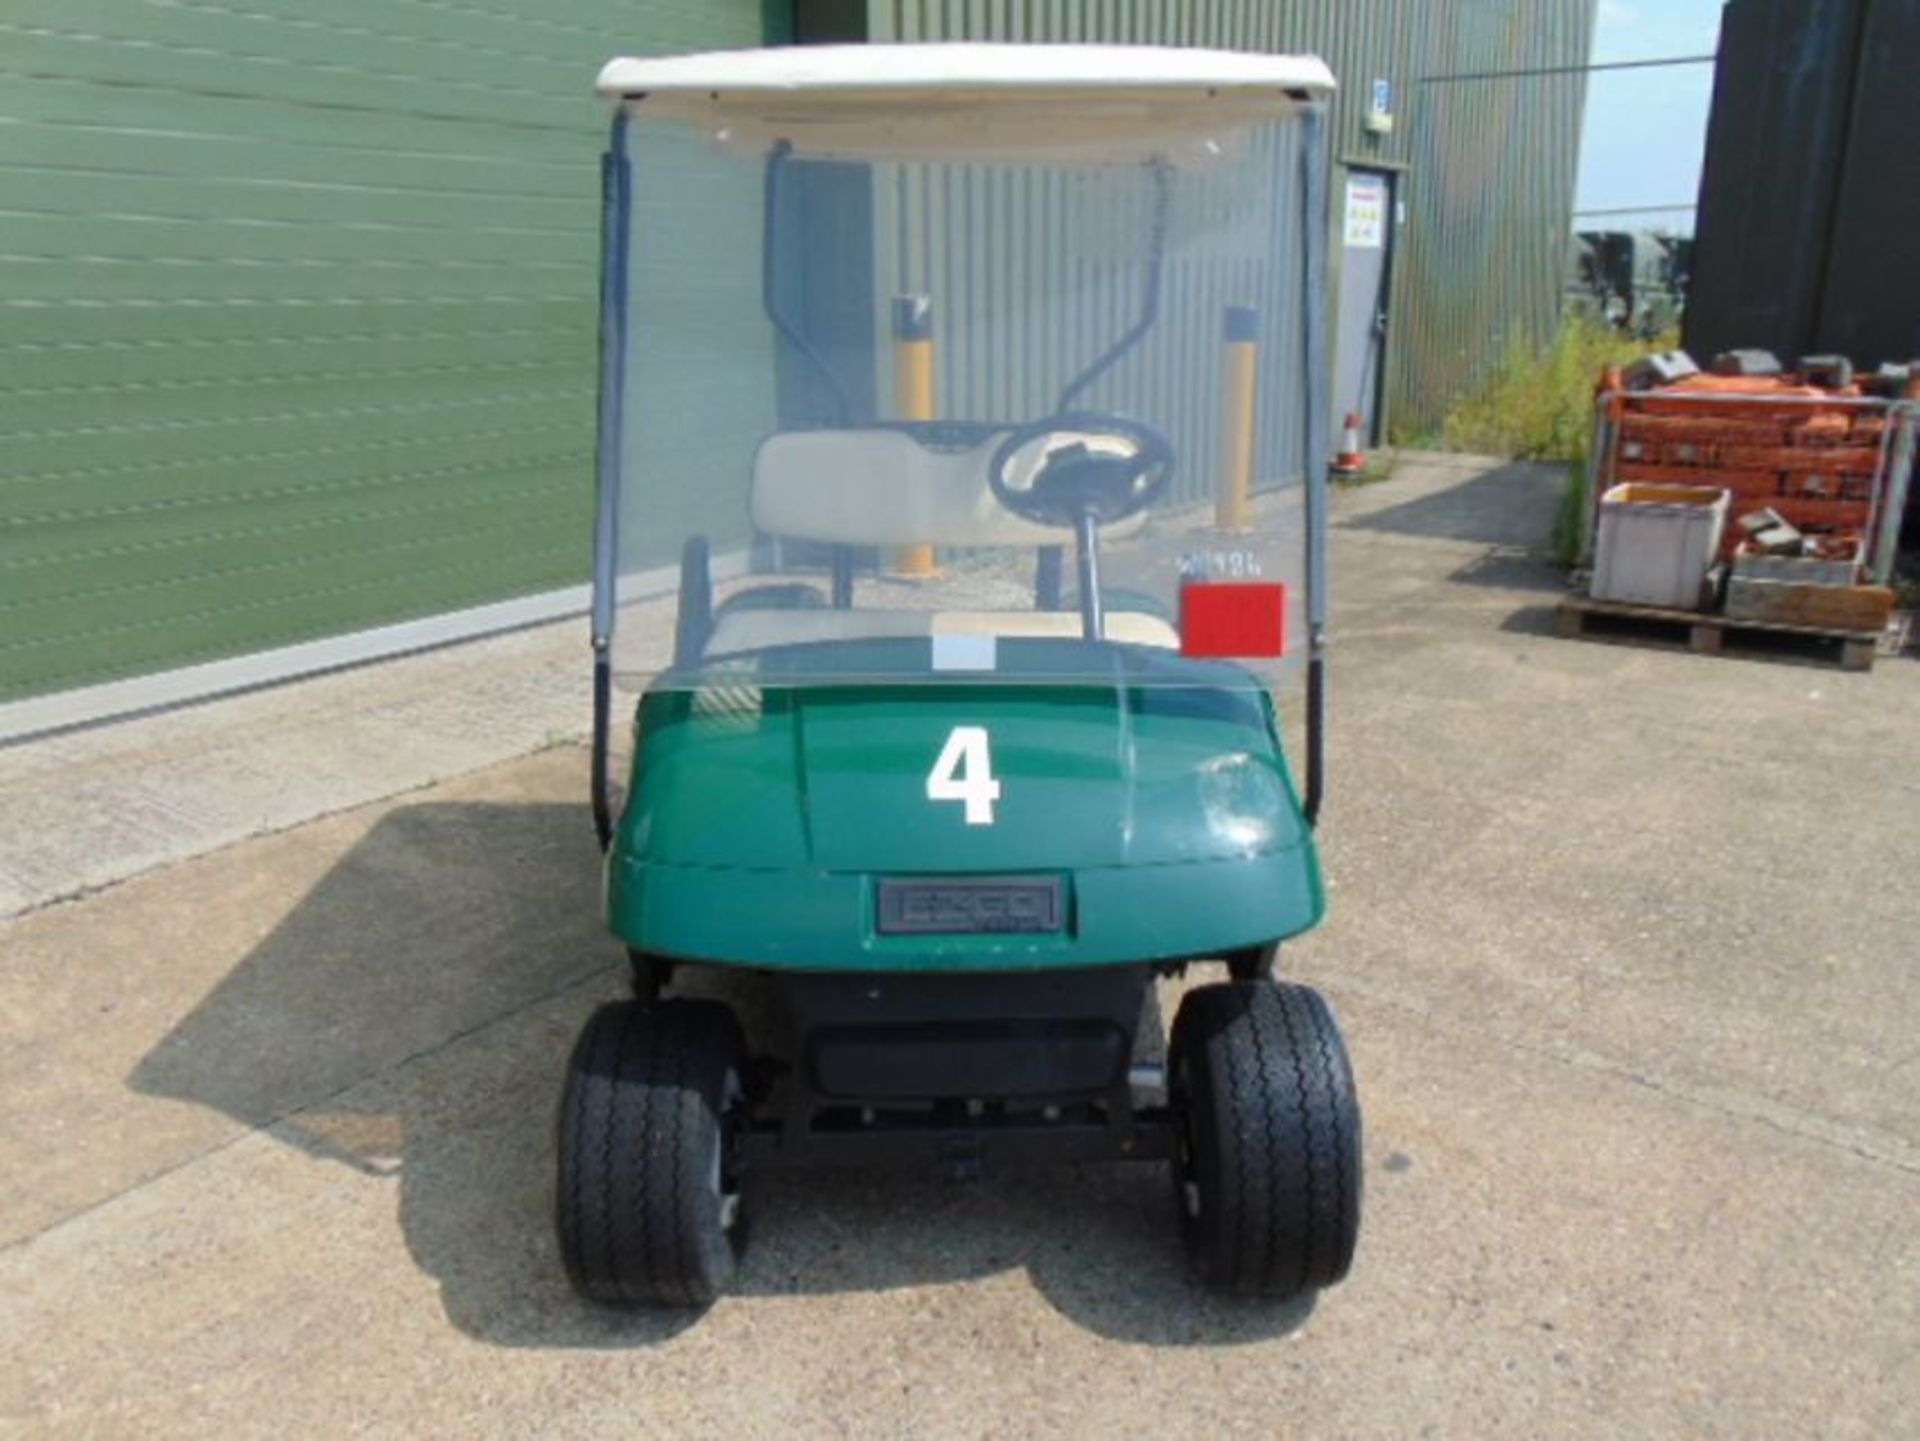 E-Z-GO LPG Gas Powered 2 Seat Golf Buggy - Image 2 of 15